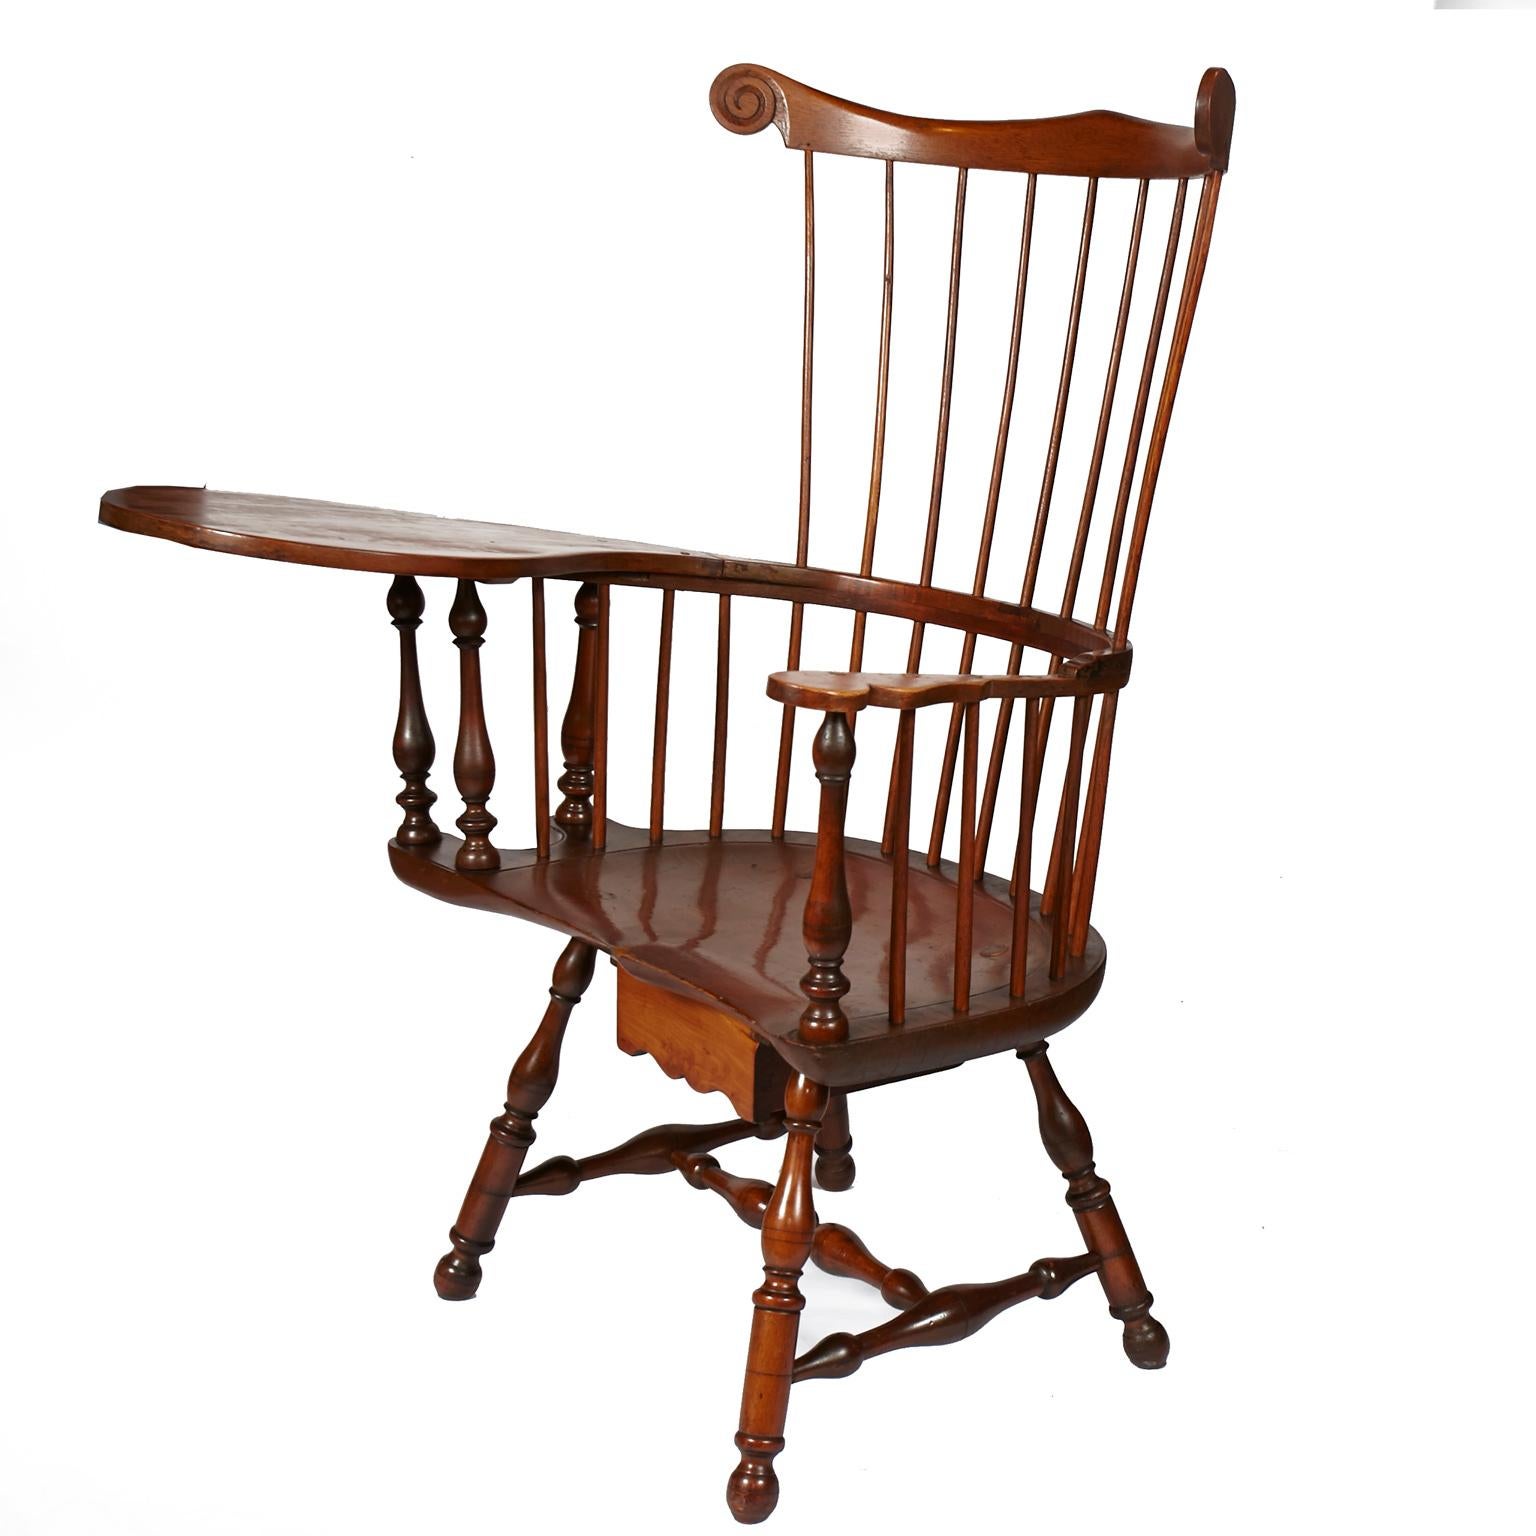 Professionally restored late 19th-early 20th century American Colonial revival, windsor writing armchair. Retains it's original patina. Structurally sound. One drawer under seat. A statement piece for any interior.
 